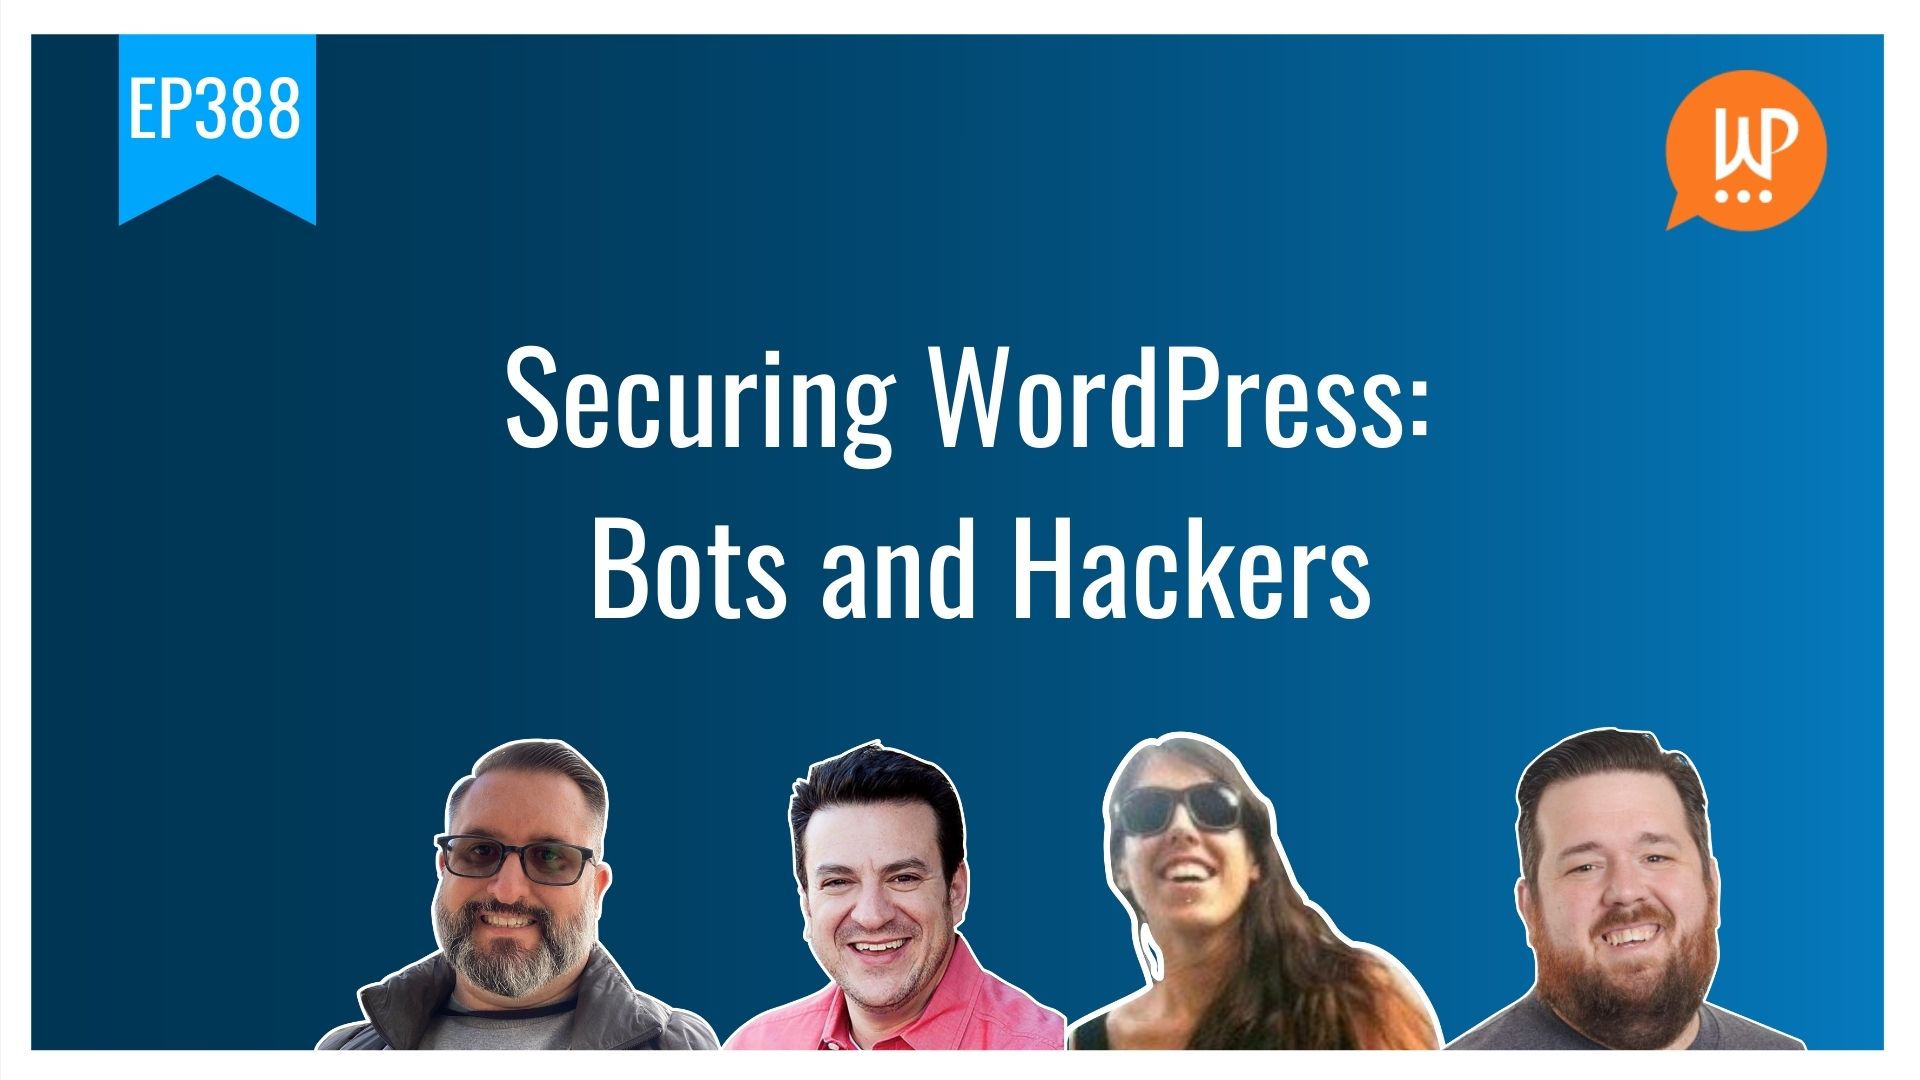 EP388 – Securing WordPress: Bots and Hackers